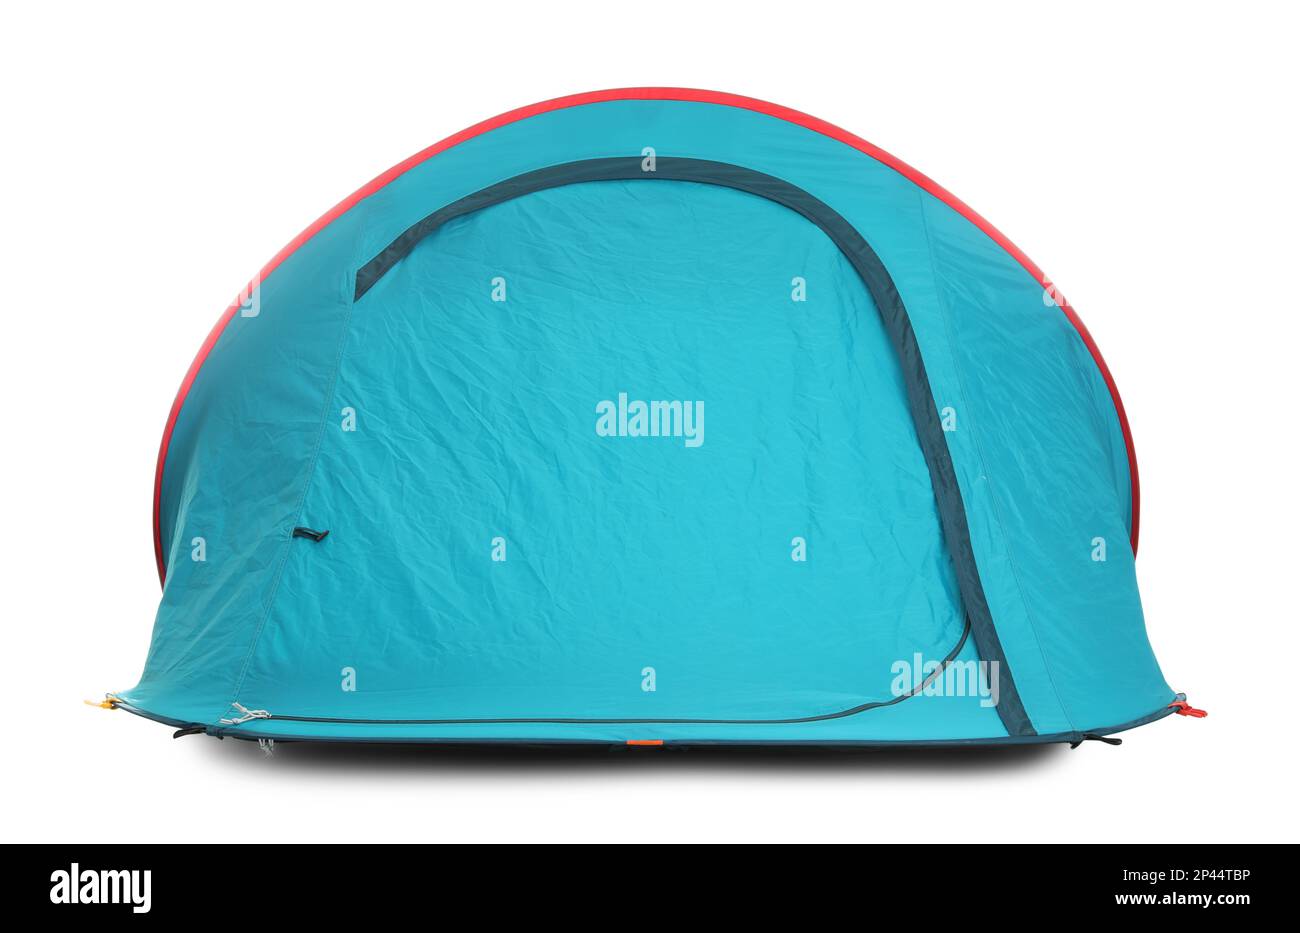 Light blue camping tent on white background Stock Photo